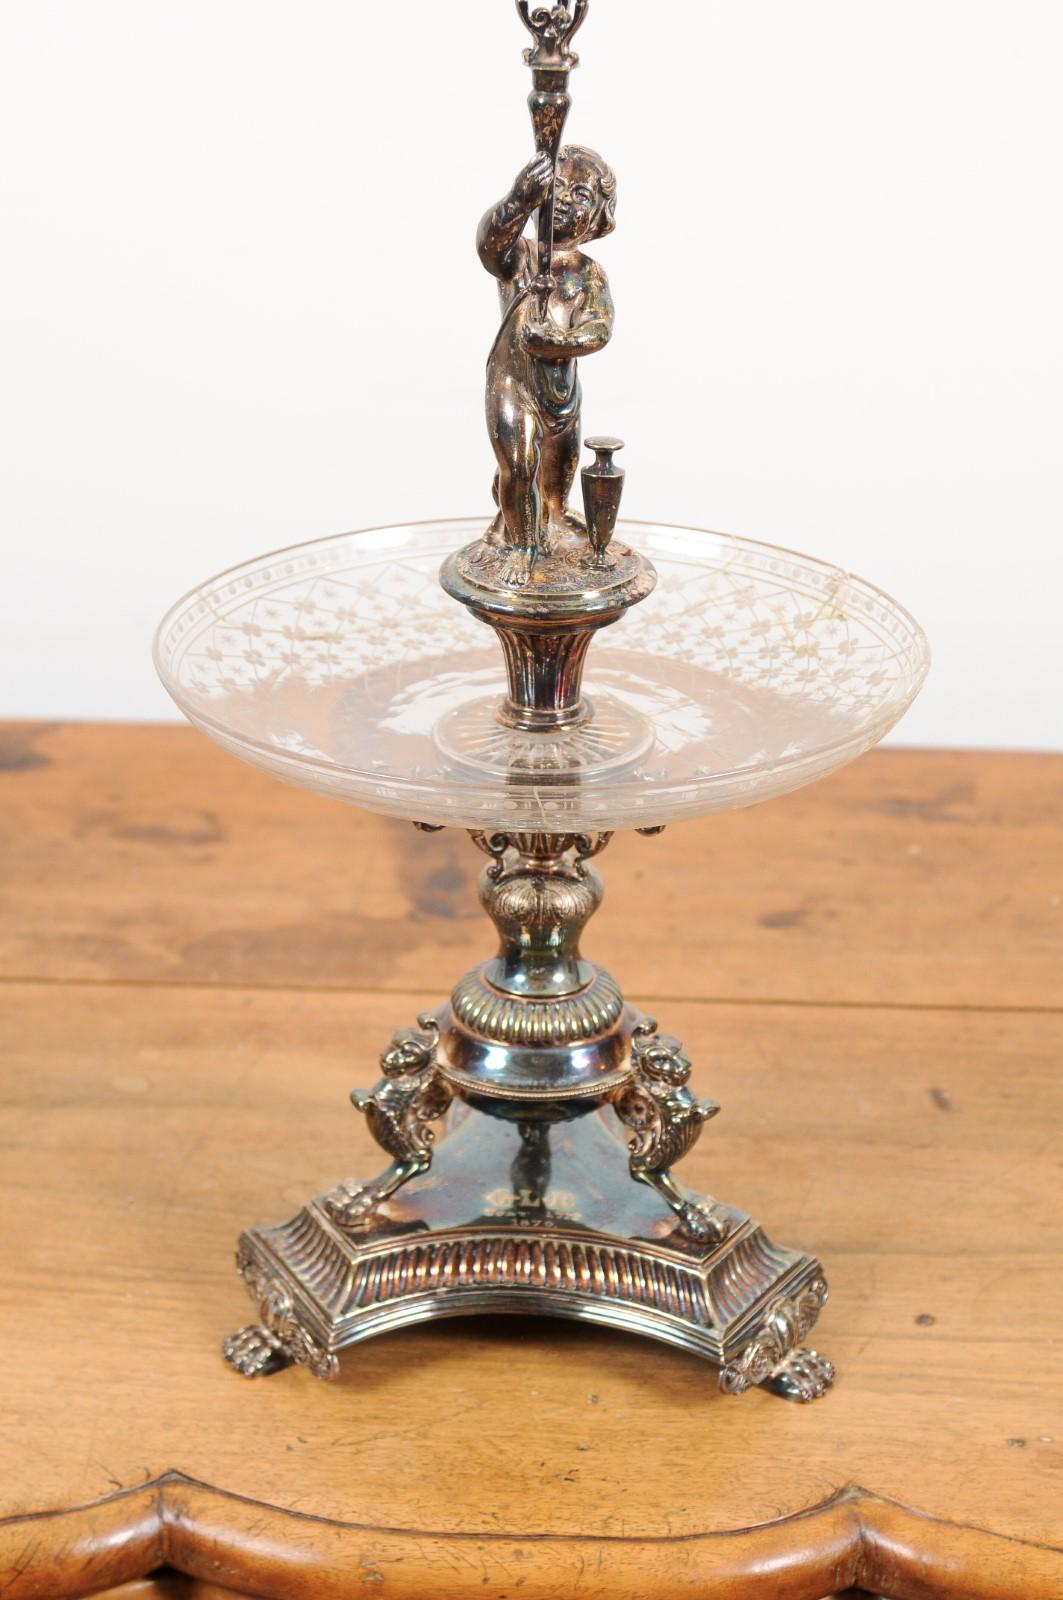 19th Century French Napoléon III 1850s Silver Epergne with Putto and Mythical Creatures